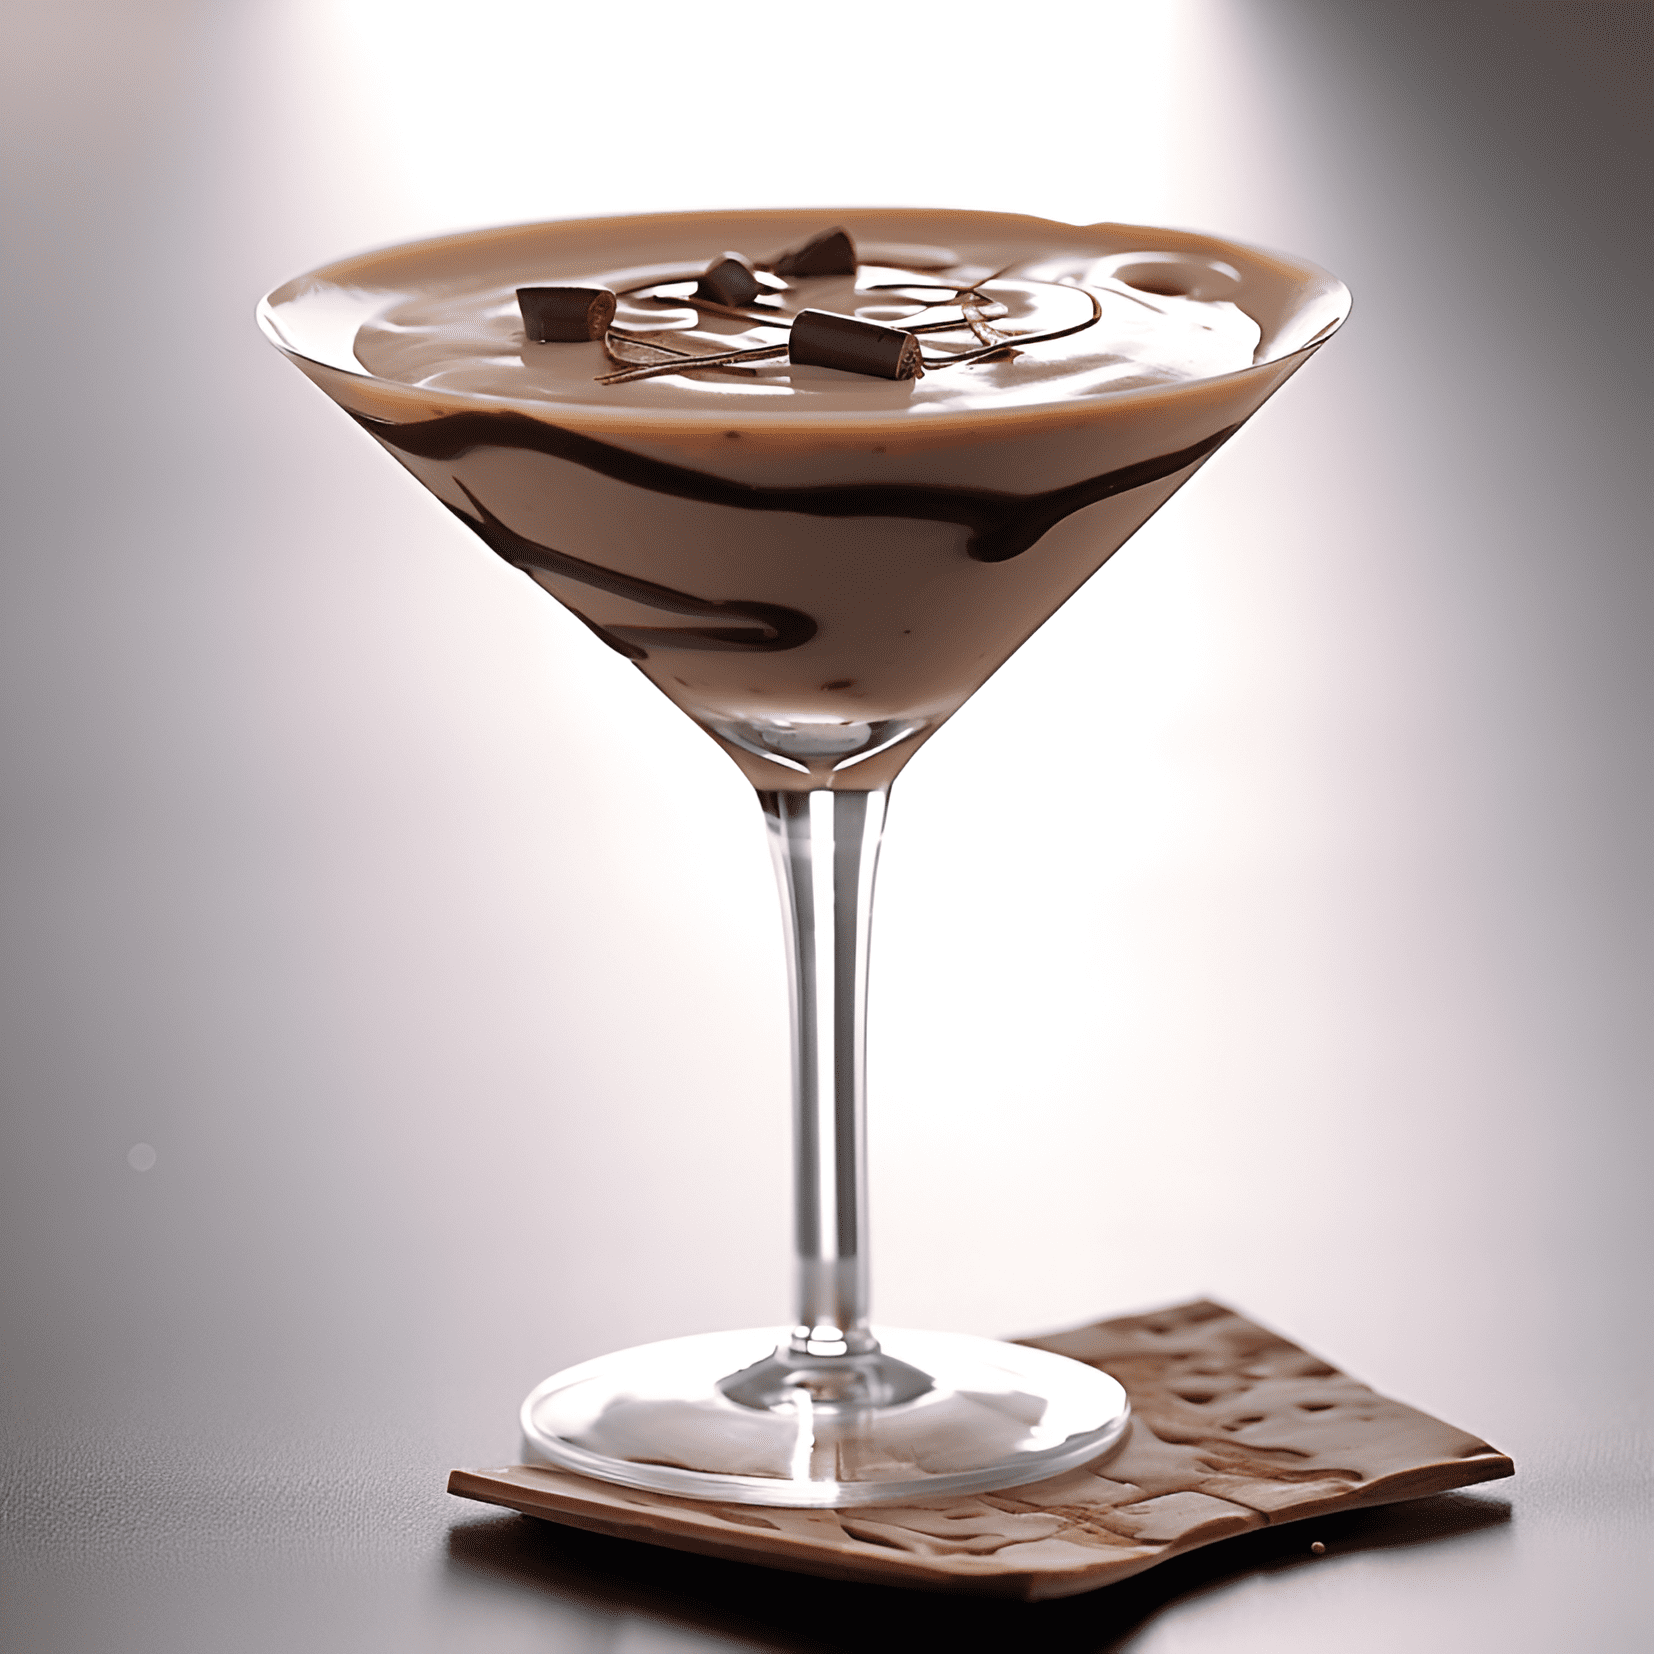 Chocolate Martini Cocktail Recipe - The Chocolate Martini is rich, creamy, and sweet, with a velvety chocolate flavor and a hint of vanilla. It has a smooth, luxurious mouthfeel and a slightly boozy kick from the vodka.